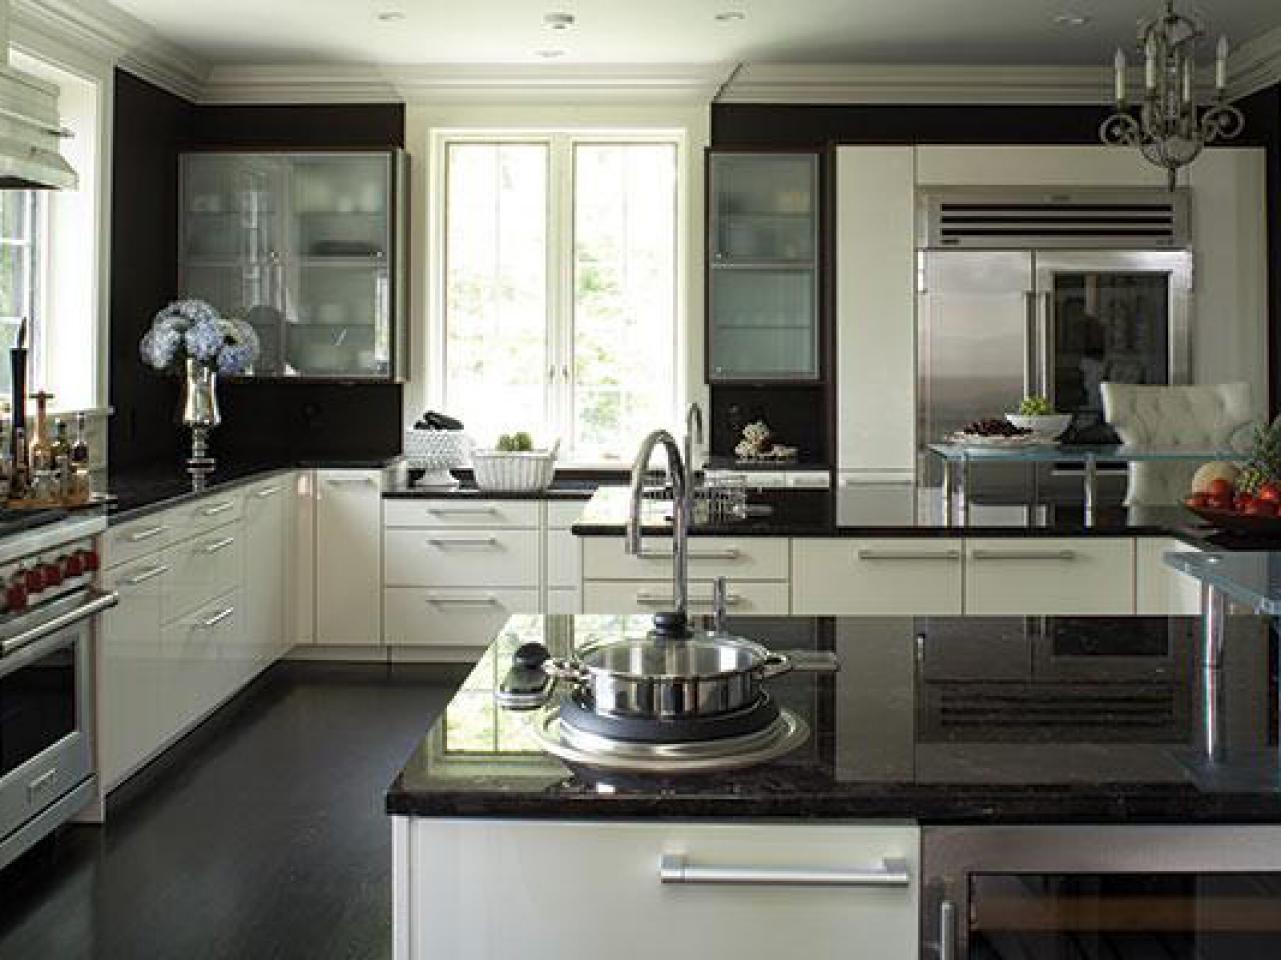 Dark Granite Countertops, What Color Countertops Go Best With Gray Cabinets